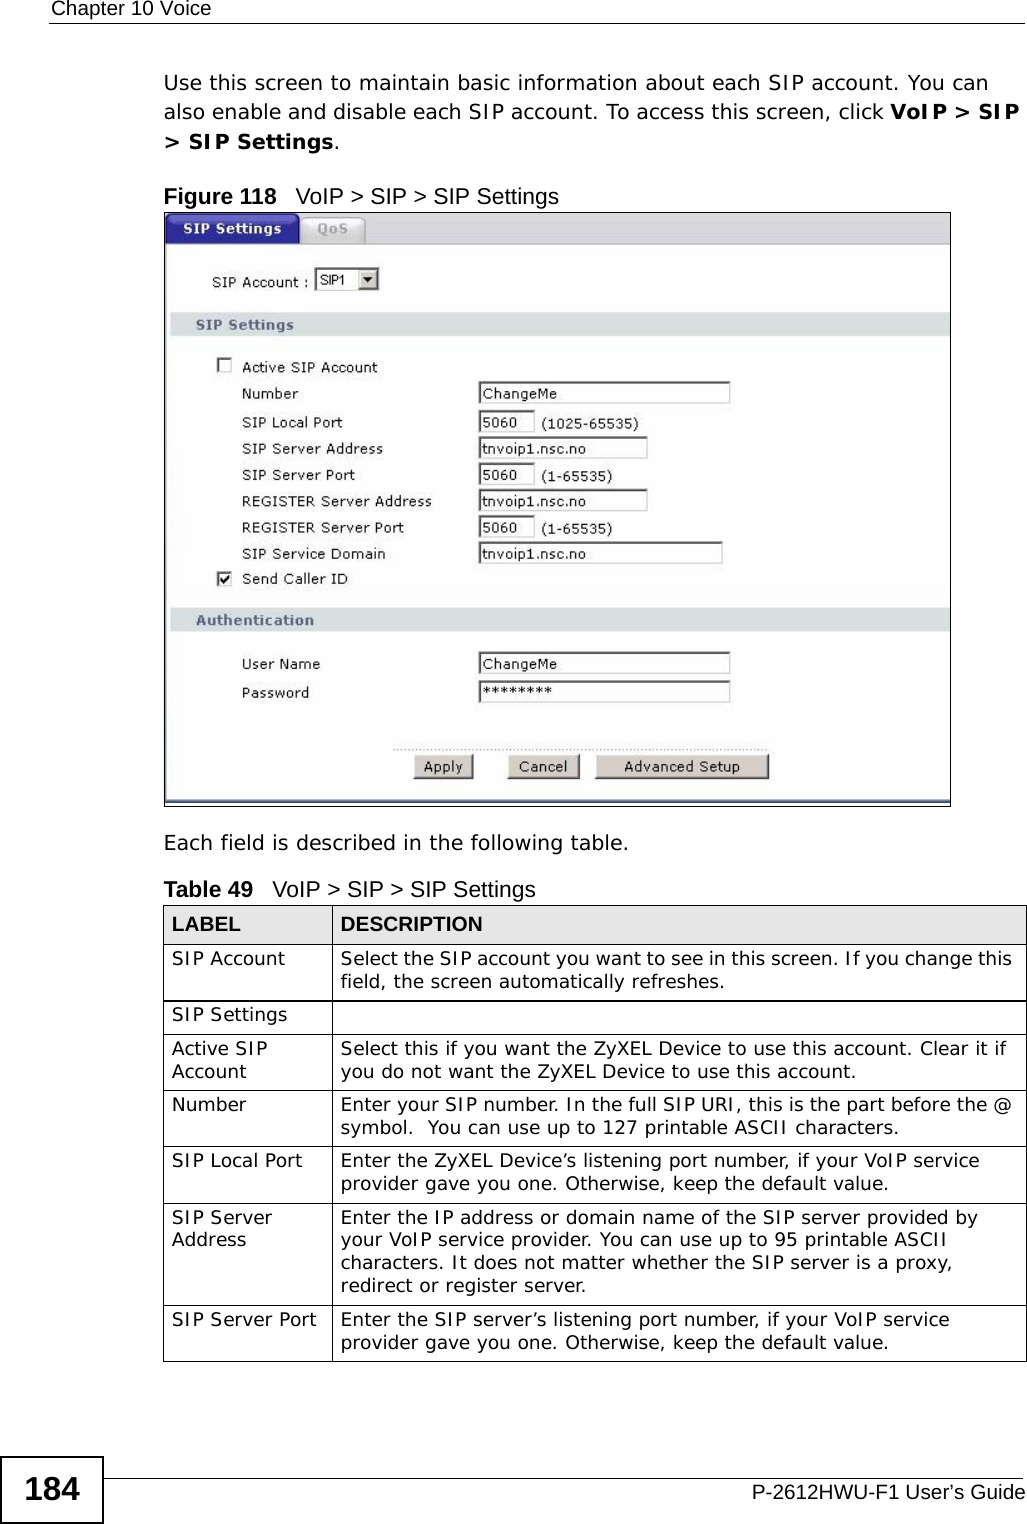 Chapter 10 VoiceP-2612HWU-F1 User’s Guide184Use this screen to maintain basic information about each SIP account. You can also enable and disable each SIP account. To access this screen, click VoIP &gt; SIP &gt; SIP Settings.Figure 118   VoIP &gt; SIP &gt; SIP SettingsEach field is described in the following table.Table 49   VoIP &gt; SIP &gt; SIP SettingsLABEL DESCRIPTIONSIP Account Select the SIP account you want to see in this screen. If you change this field, the screen automatically refreshes.SIP SettingsActive SIP Account Select this if you want the ZyXEL Device to use this account. Clear it if you do not want the ZyXEL Device to use this account.Number Enter your SIP number. In the full SIP URI, this is the part before the @ symbol.  You can use up to 127 printable ASCII characters.SIP Local Port Enter the ZyXEL Device’s listening port number, if your VoIP service provider gave you one. Otherwise, keep the default value.SIP Server Address Enter the IP address or domain name of the SIP server provided by your VoIP service provider. You can use up to 95 printable ASCII characters. It does not matter whether the SIP server is a proxy, redirect or register server.SIP Server Port Enter the SIP server’s listening port number, if your VoIP service provider gave you one. Otherwise, keep the default value.